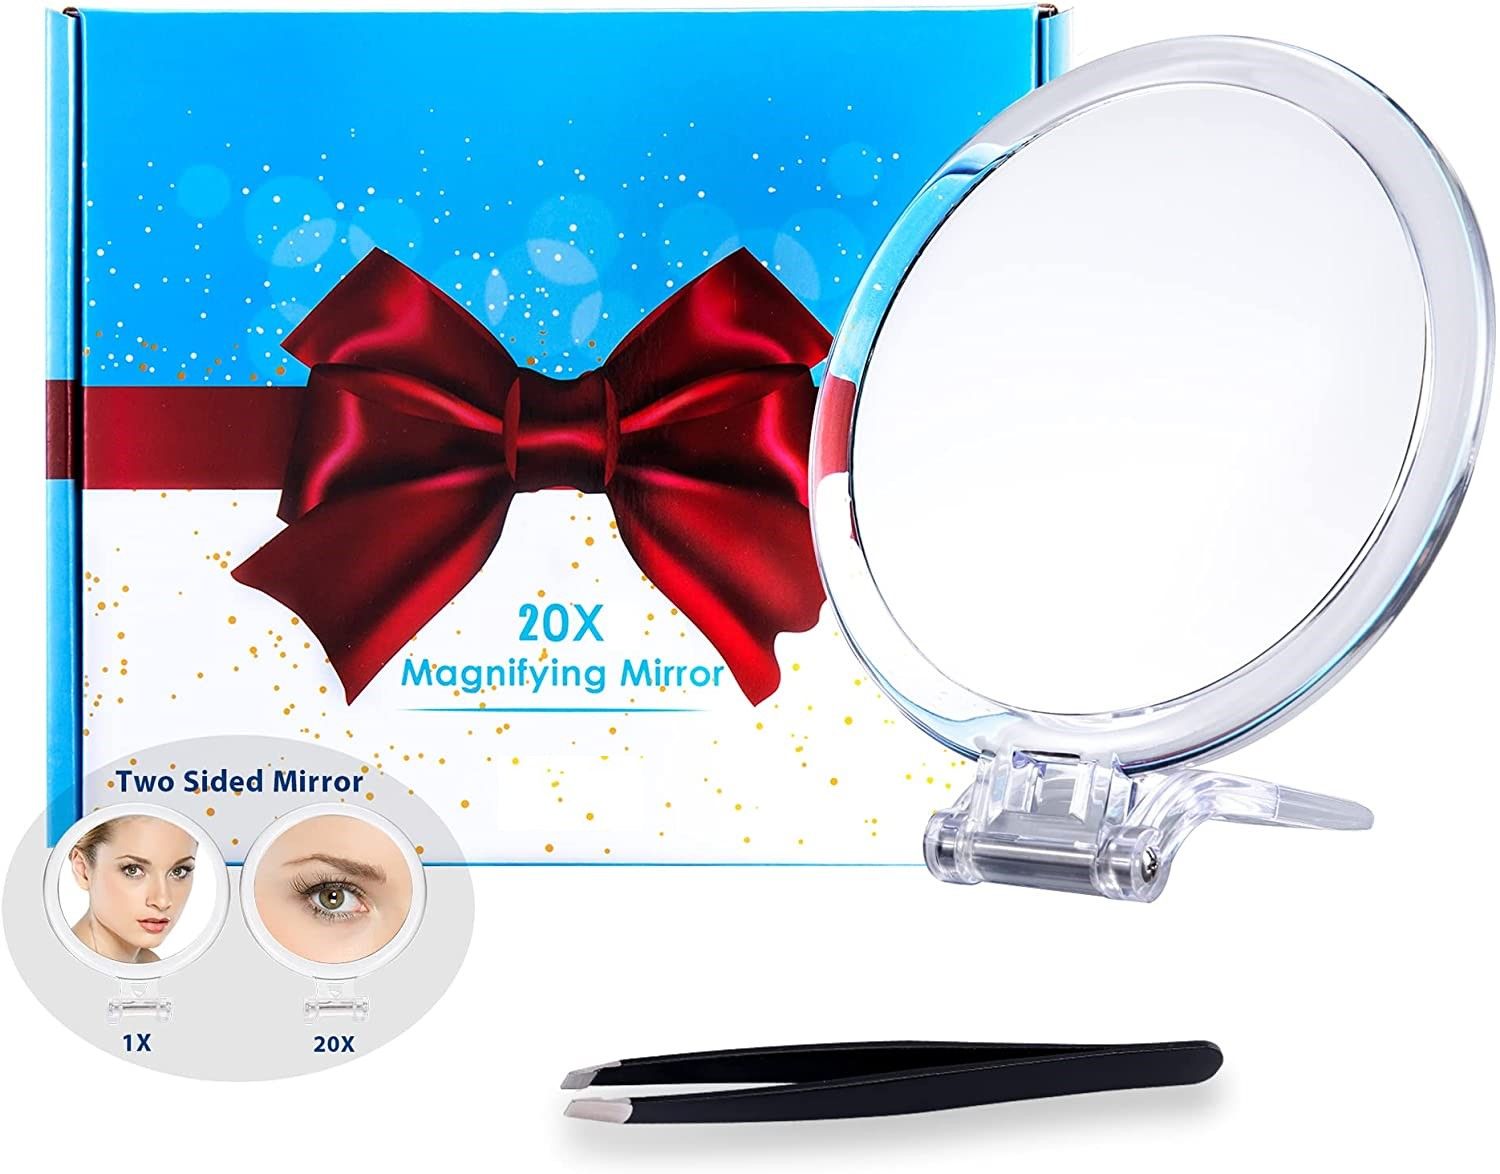 20X Magnifying Hand Mirror Two Sided Use for Makeup Application, Tweezing, and Blackhead/Blemish Removal (15 cm) - SILBERSHELL